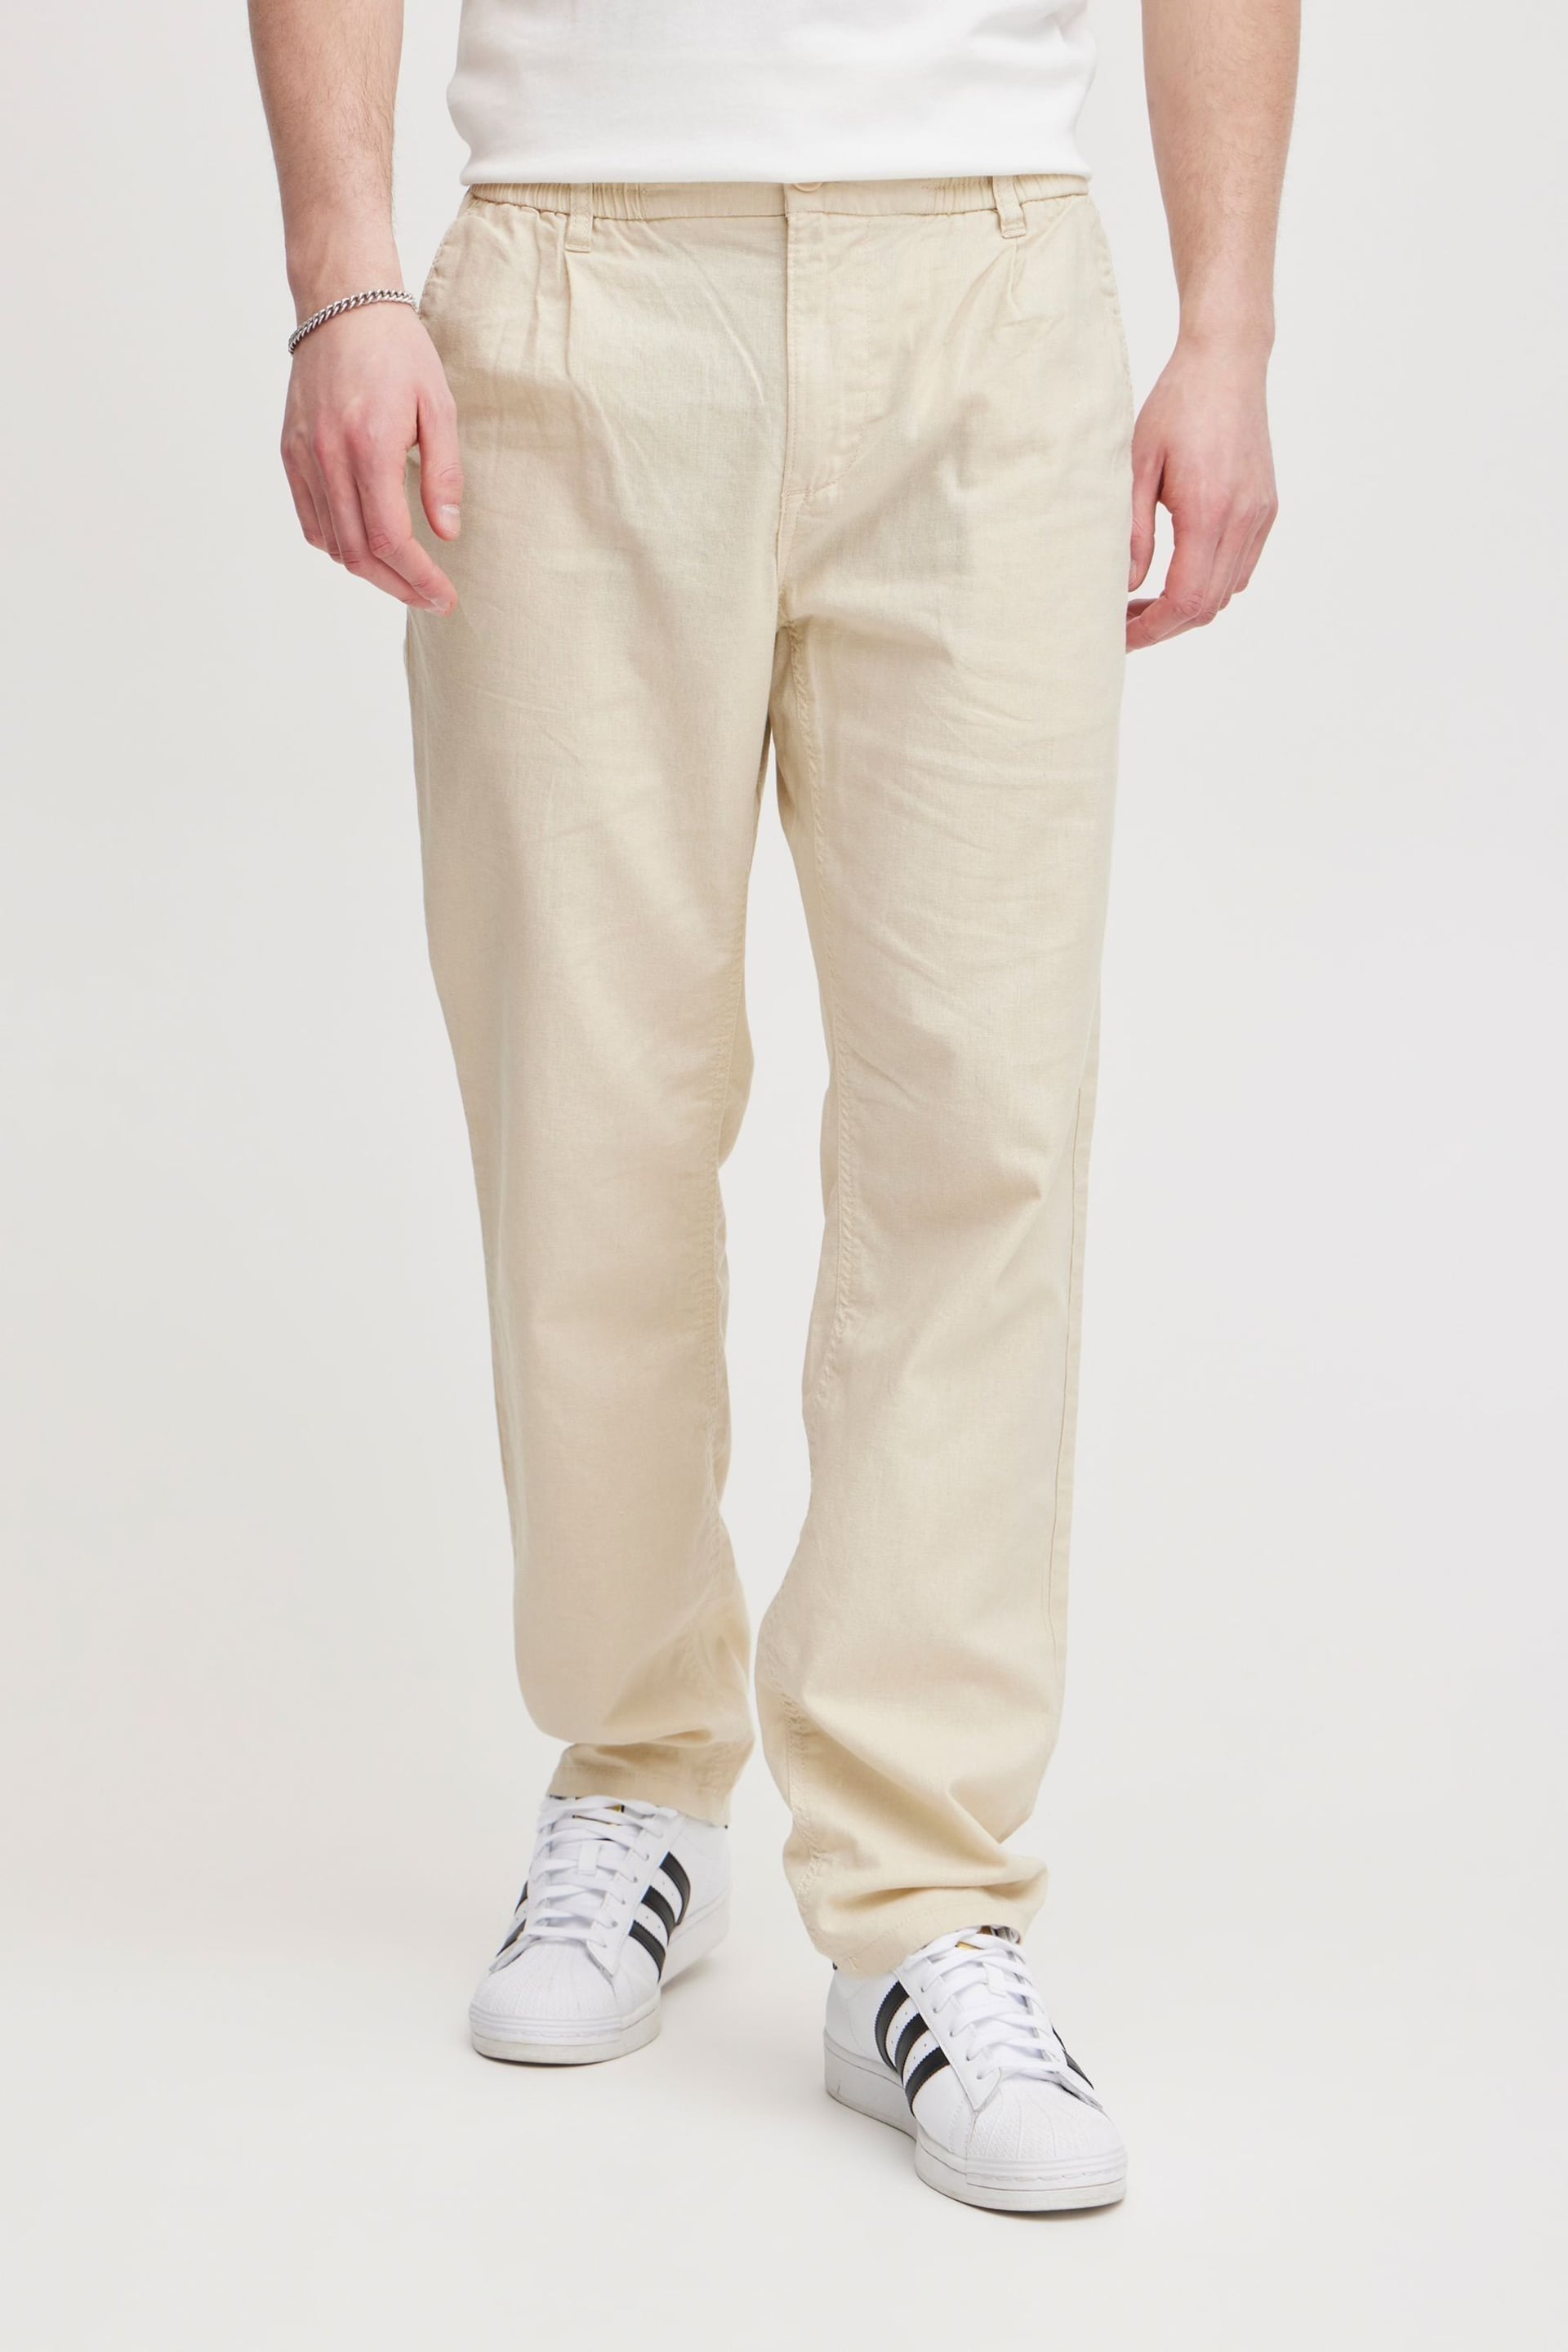 Blend Cream Linen Chino Trousers - Image 1 of 5